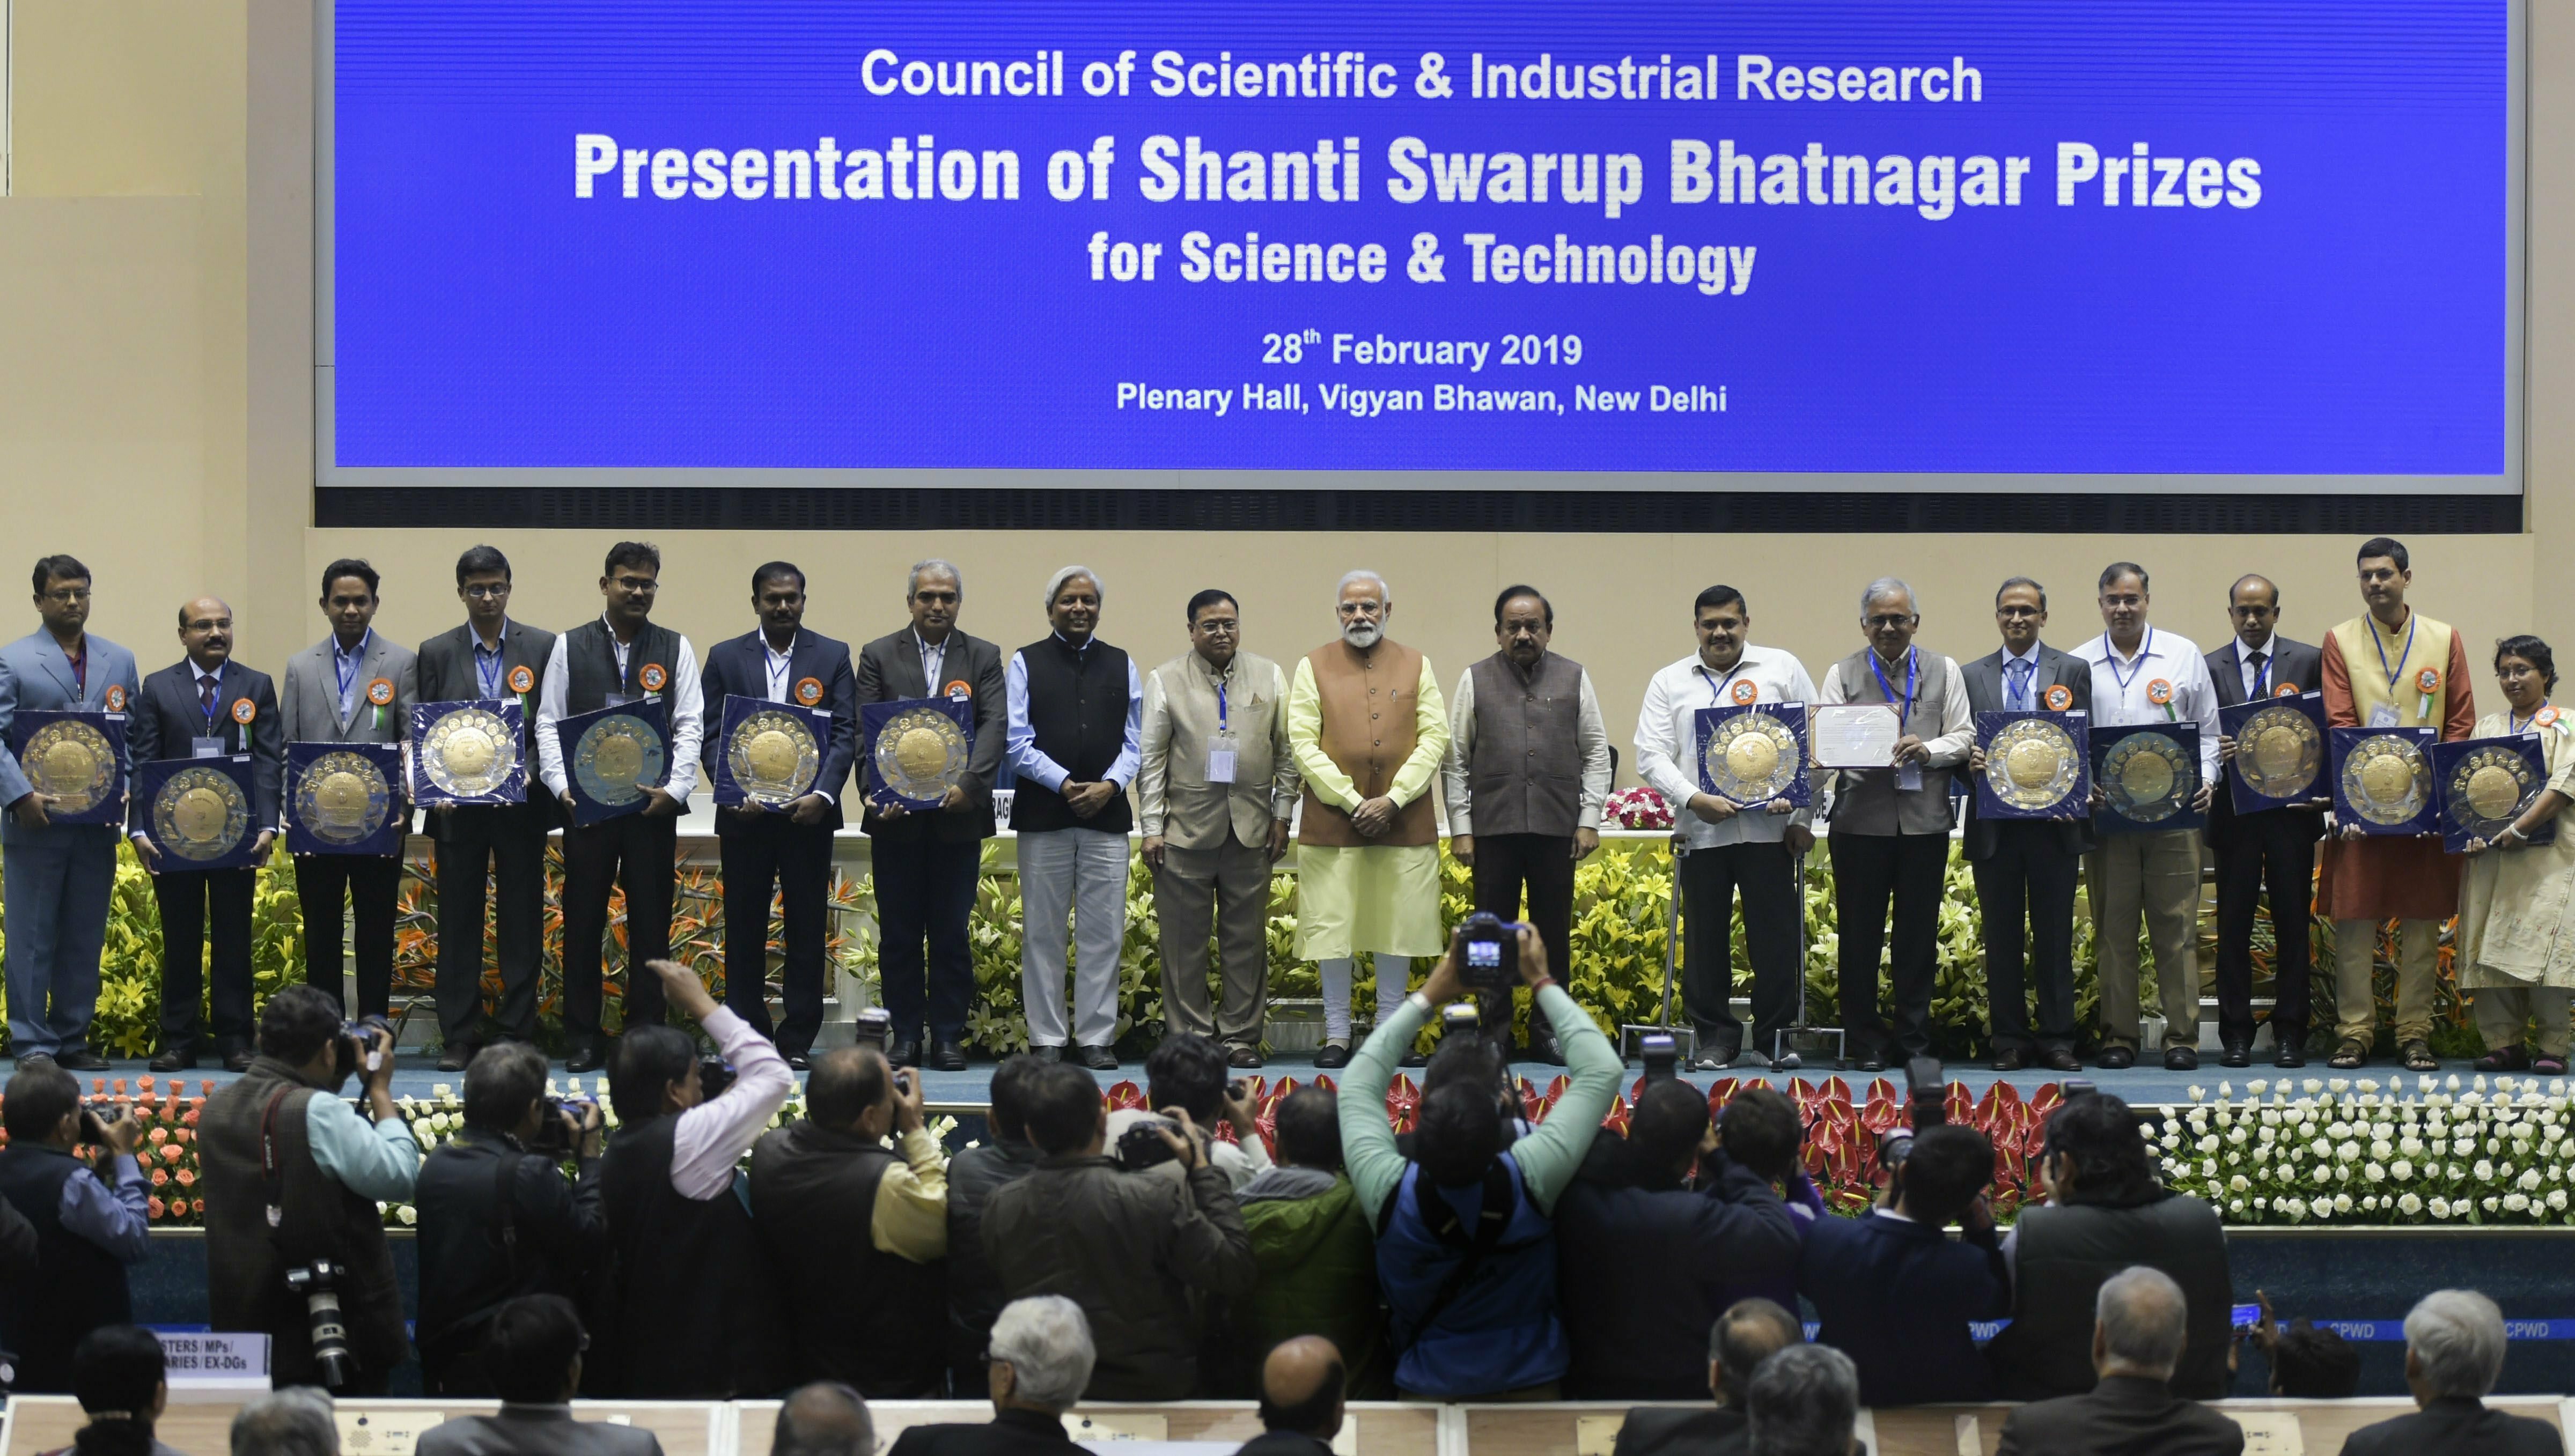 Prime Minister Narendra Modi in a group photograph with the recipients of the CSIR's Shanti Swarup Bhatnagar Prize for the year 2018 at the award ceremony in New Delhi - PTI